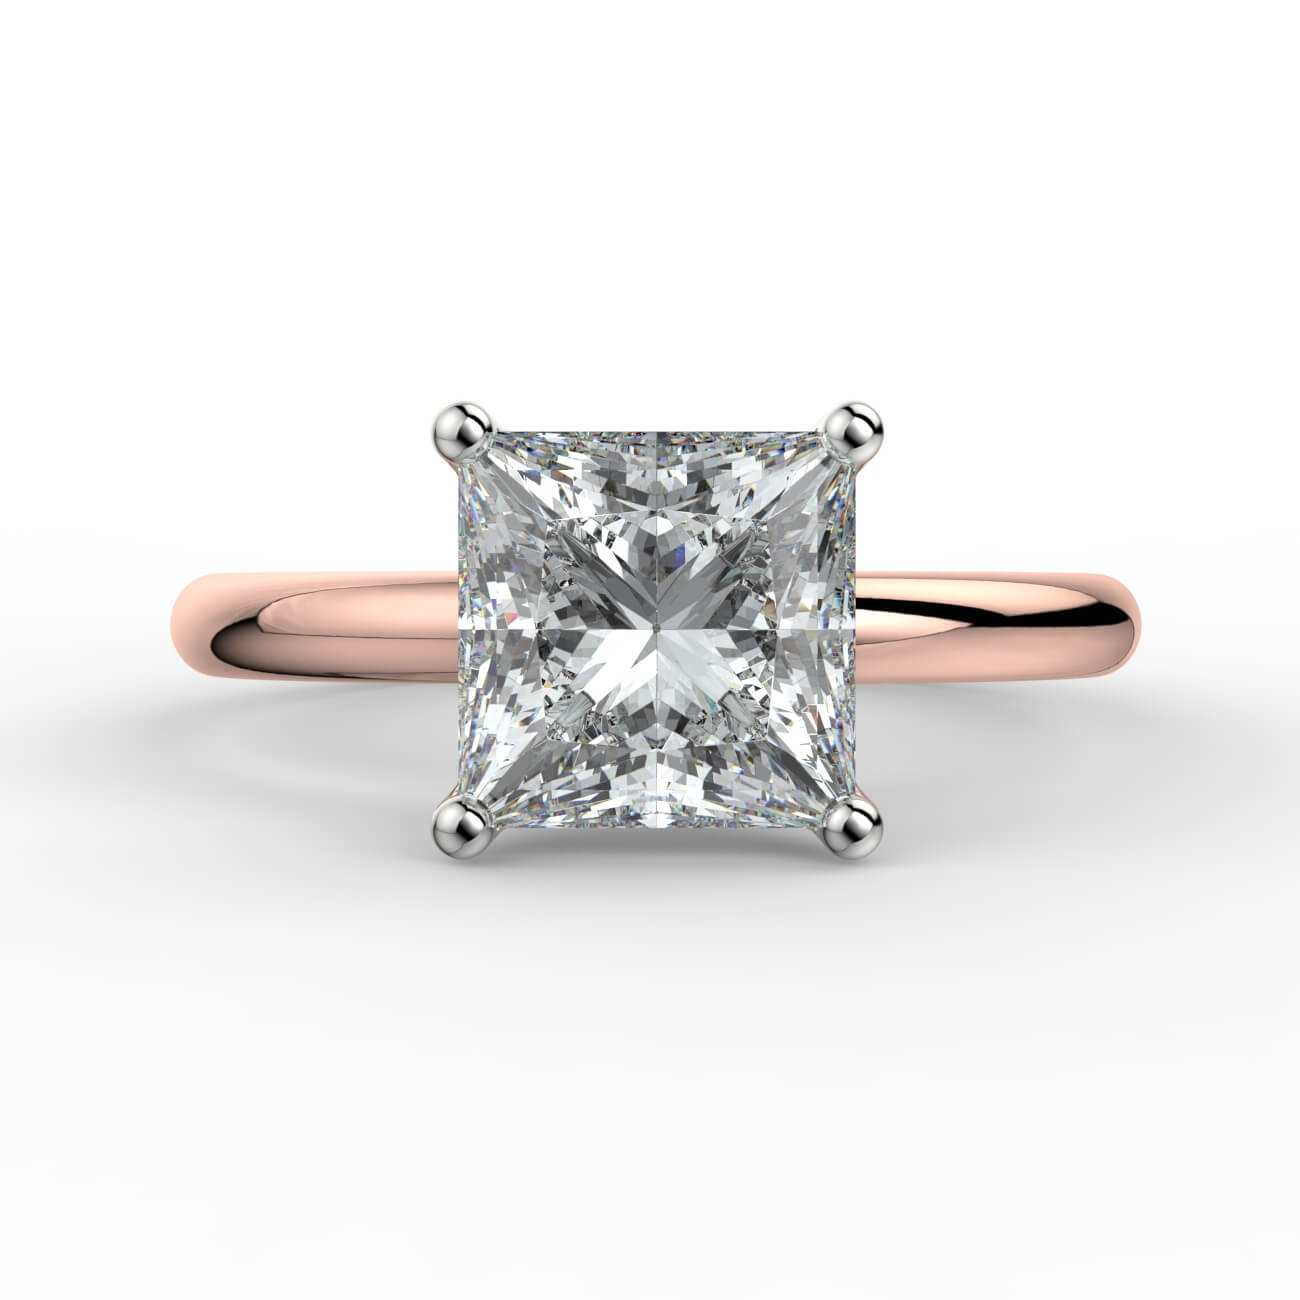 Solitaire princess cut diamond engagement ring in white and rose gold – Australian Diamond Network